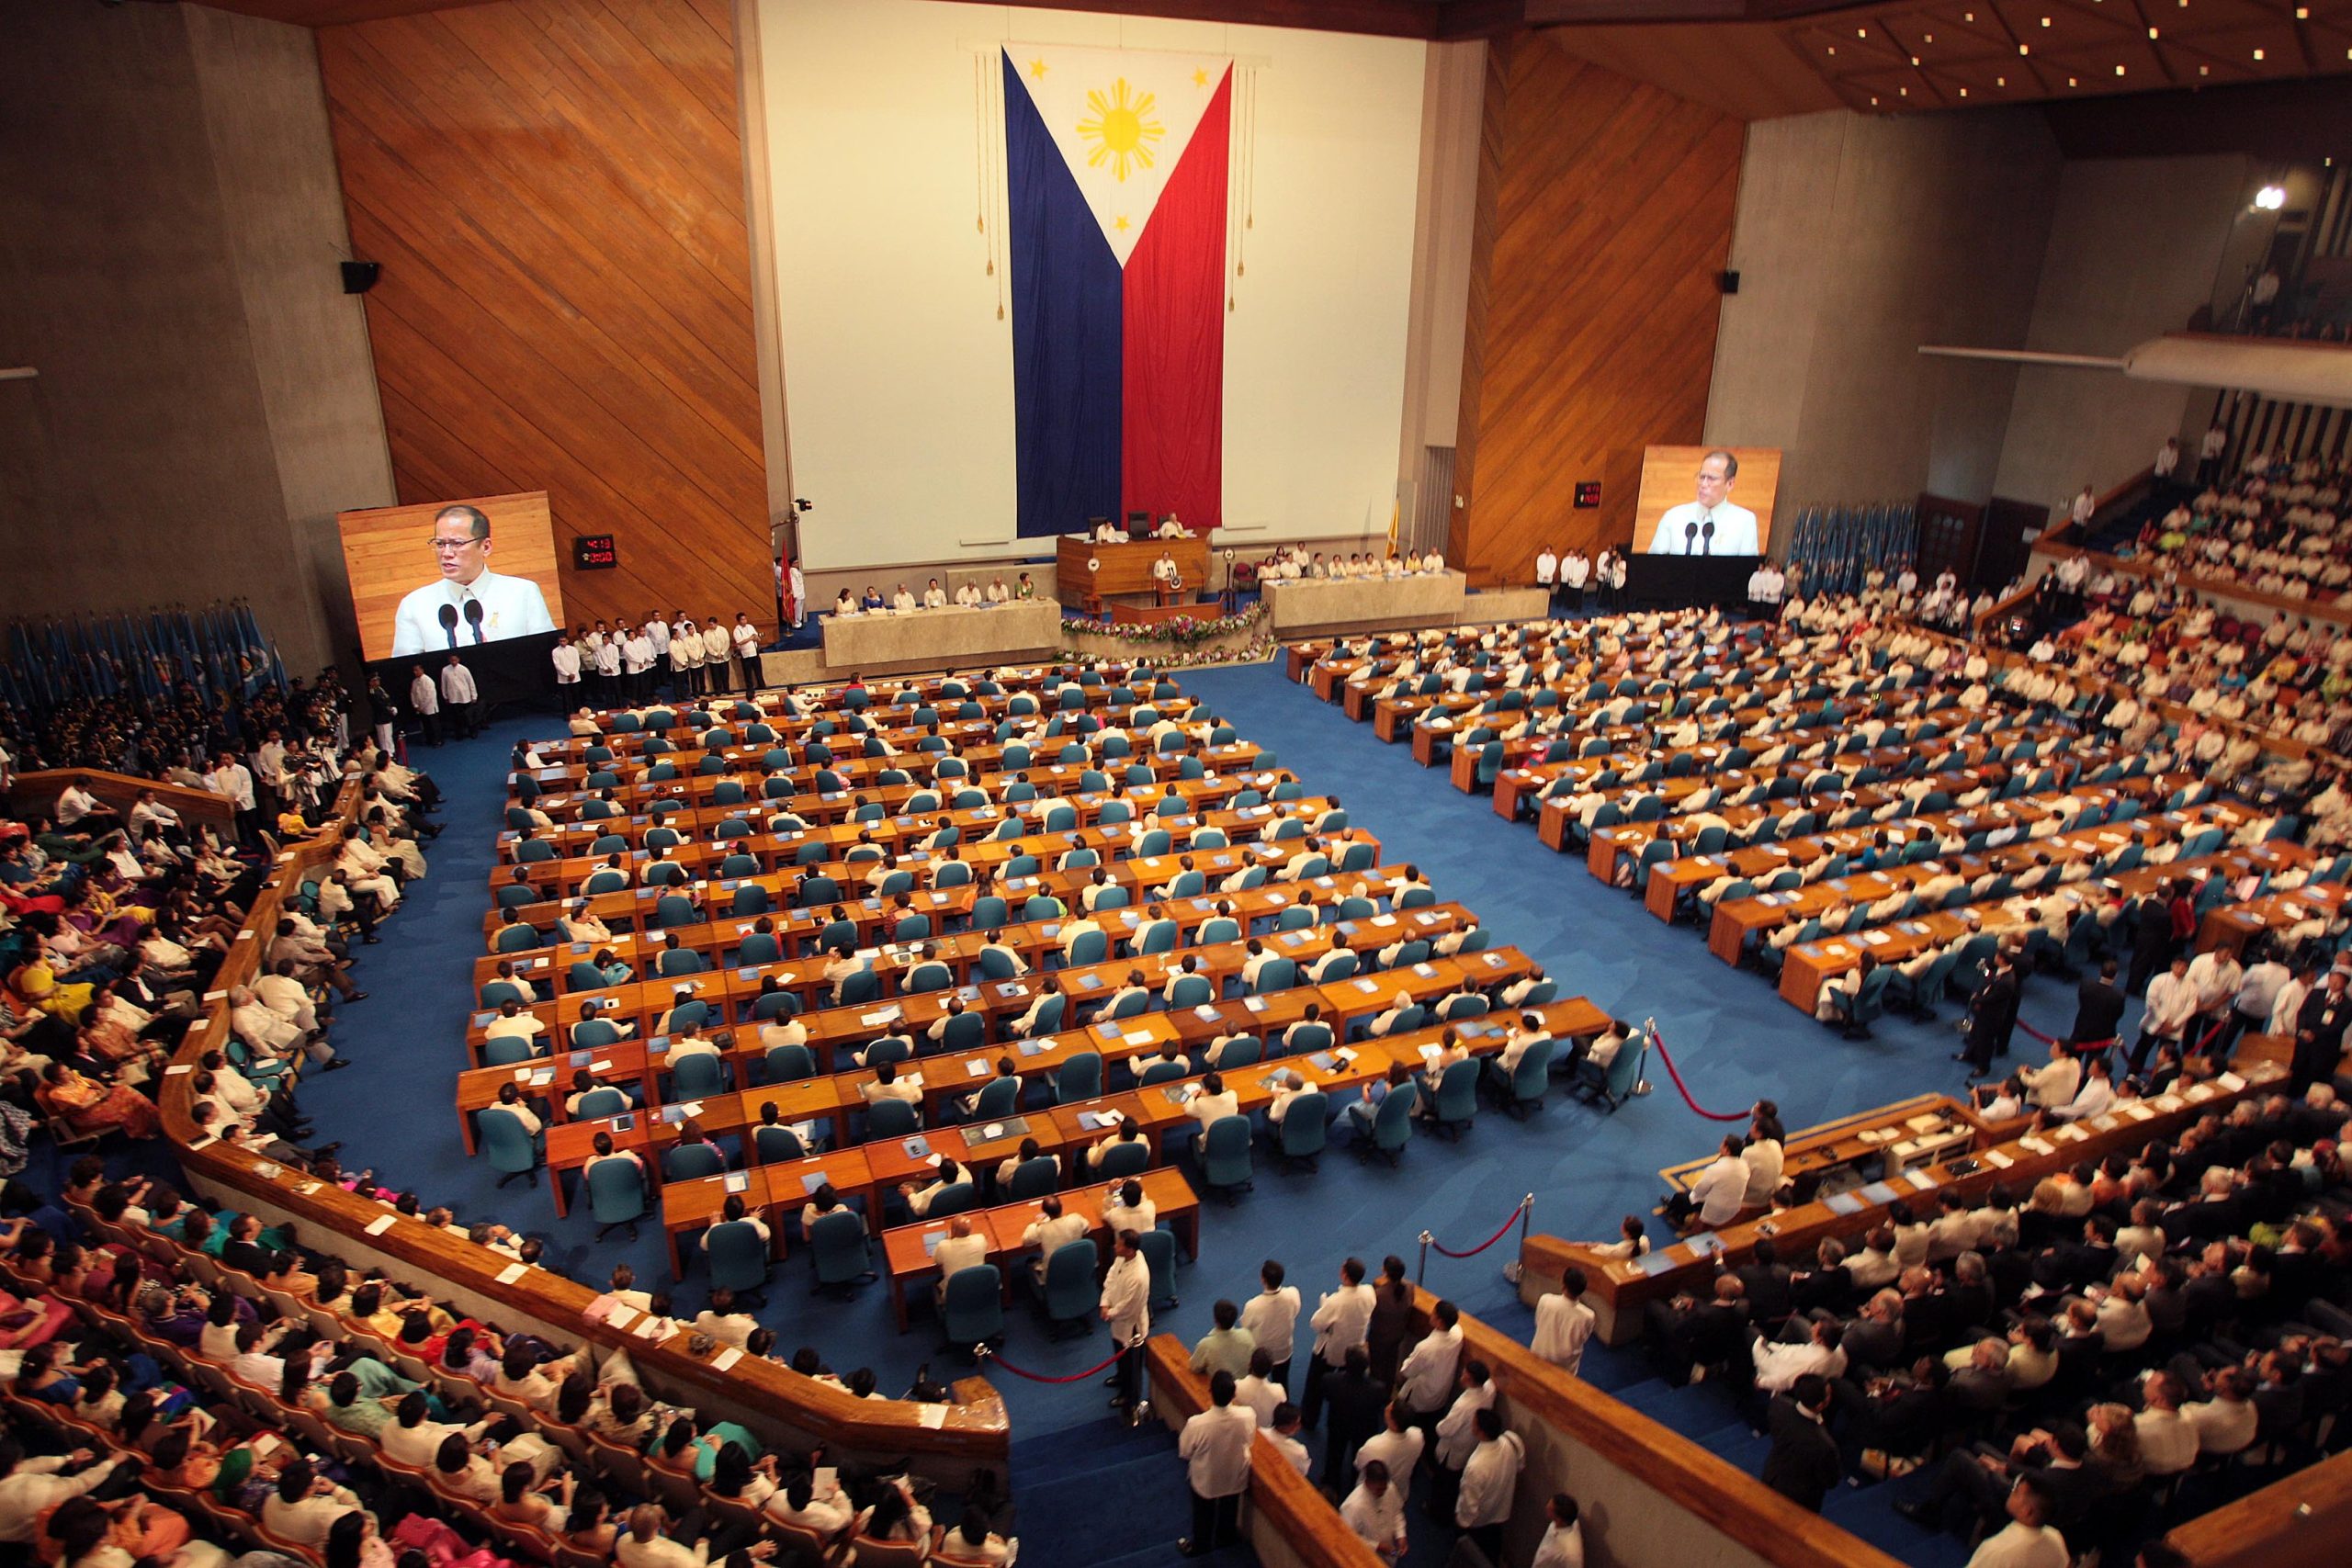 In the Philippines, senate issues statement against people's initiative